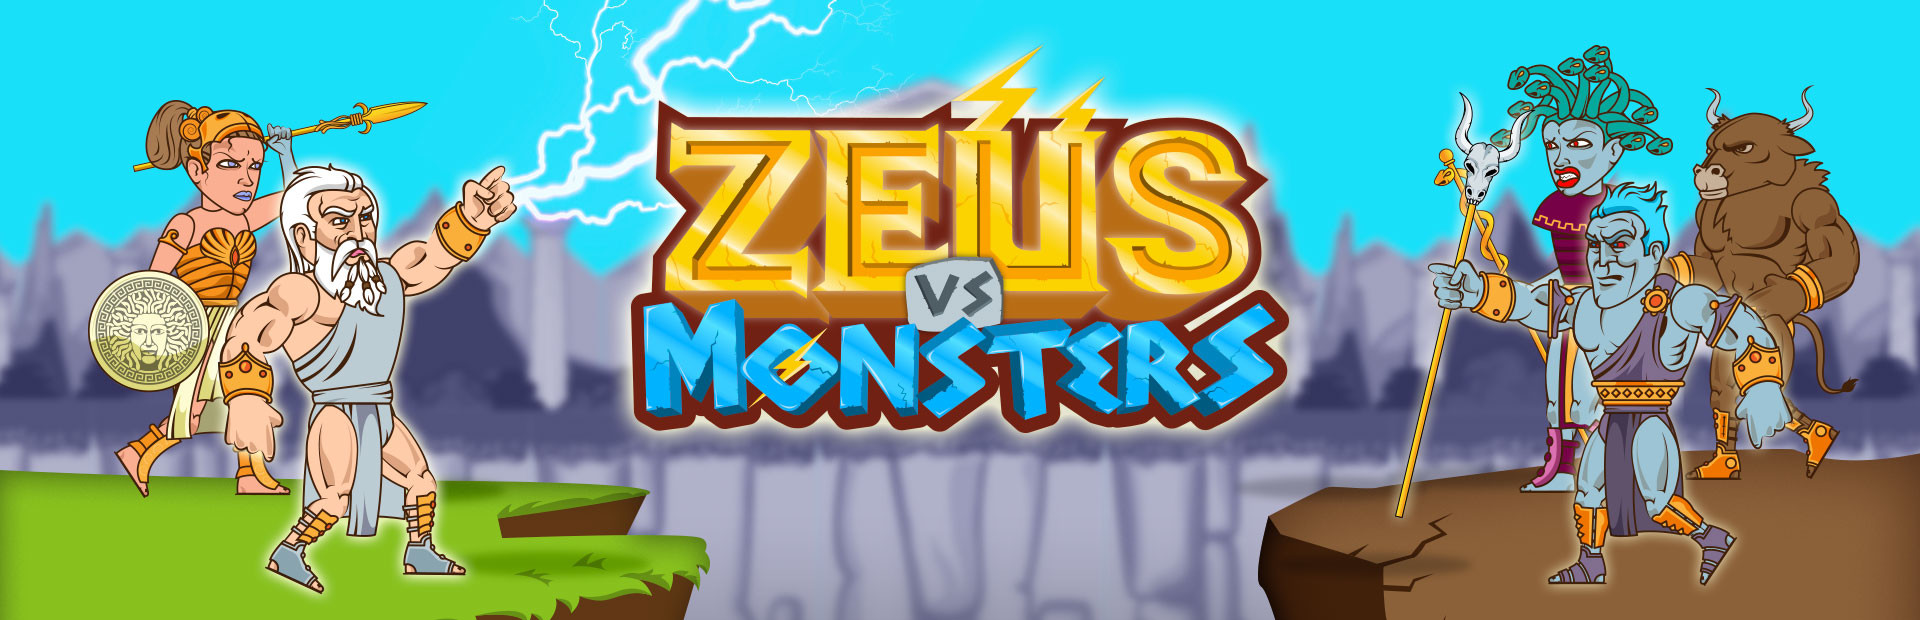 Zeus vs Monsters - Math Game for kids cover image